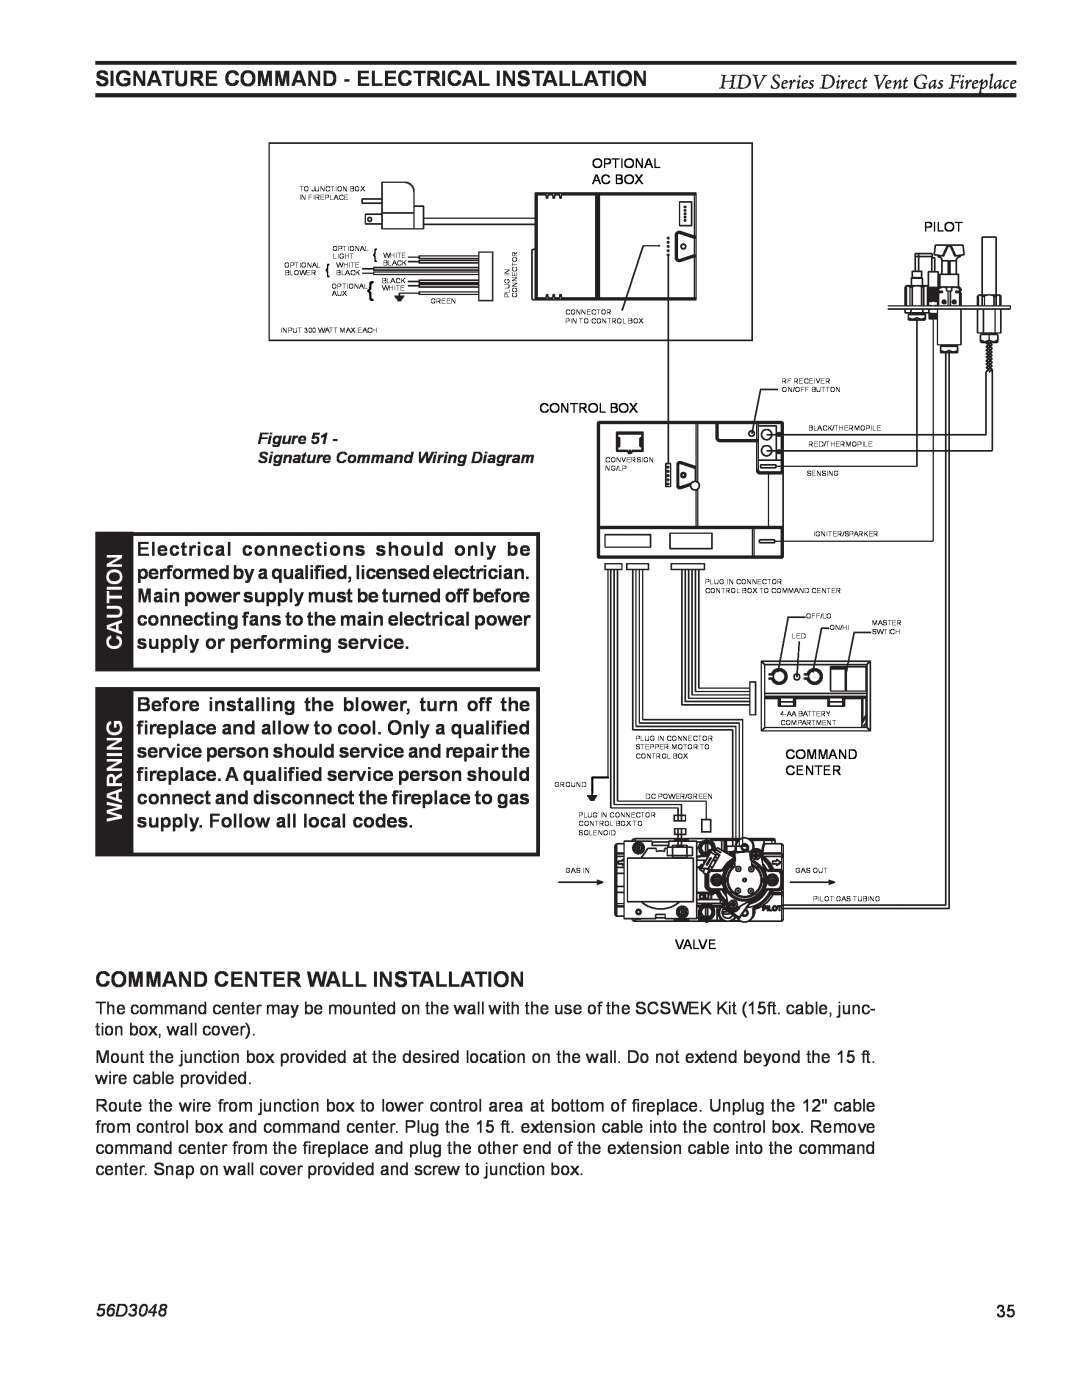 Monessen Hearth HDV500NV/PV Signature Command - Electrical Installation, Warning Caution, Command Center Wall Installation 